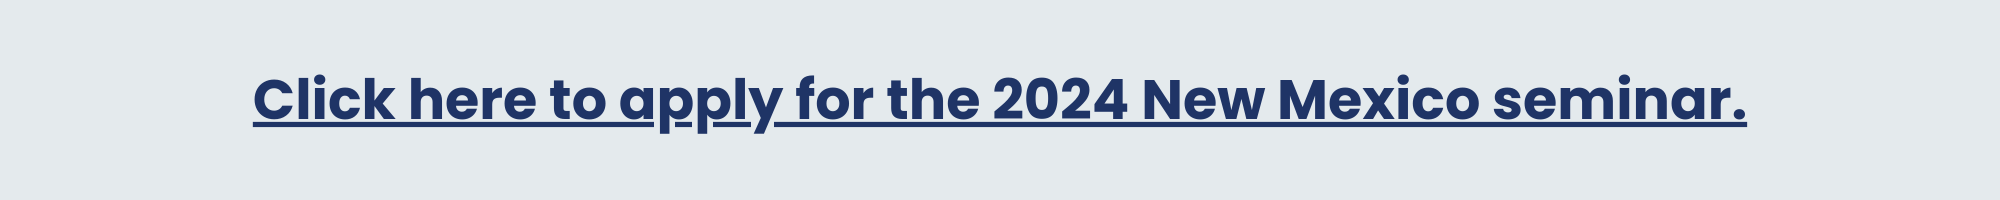 Click here to apply for the 2024 New Mexico seminar.